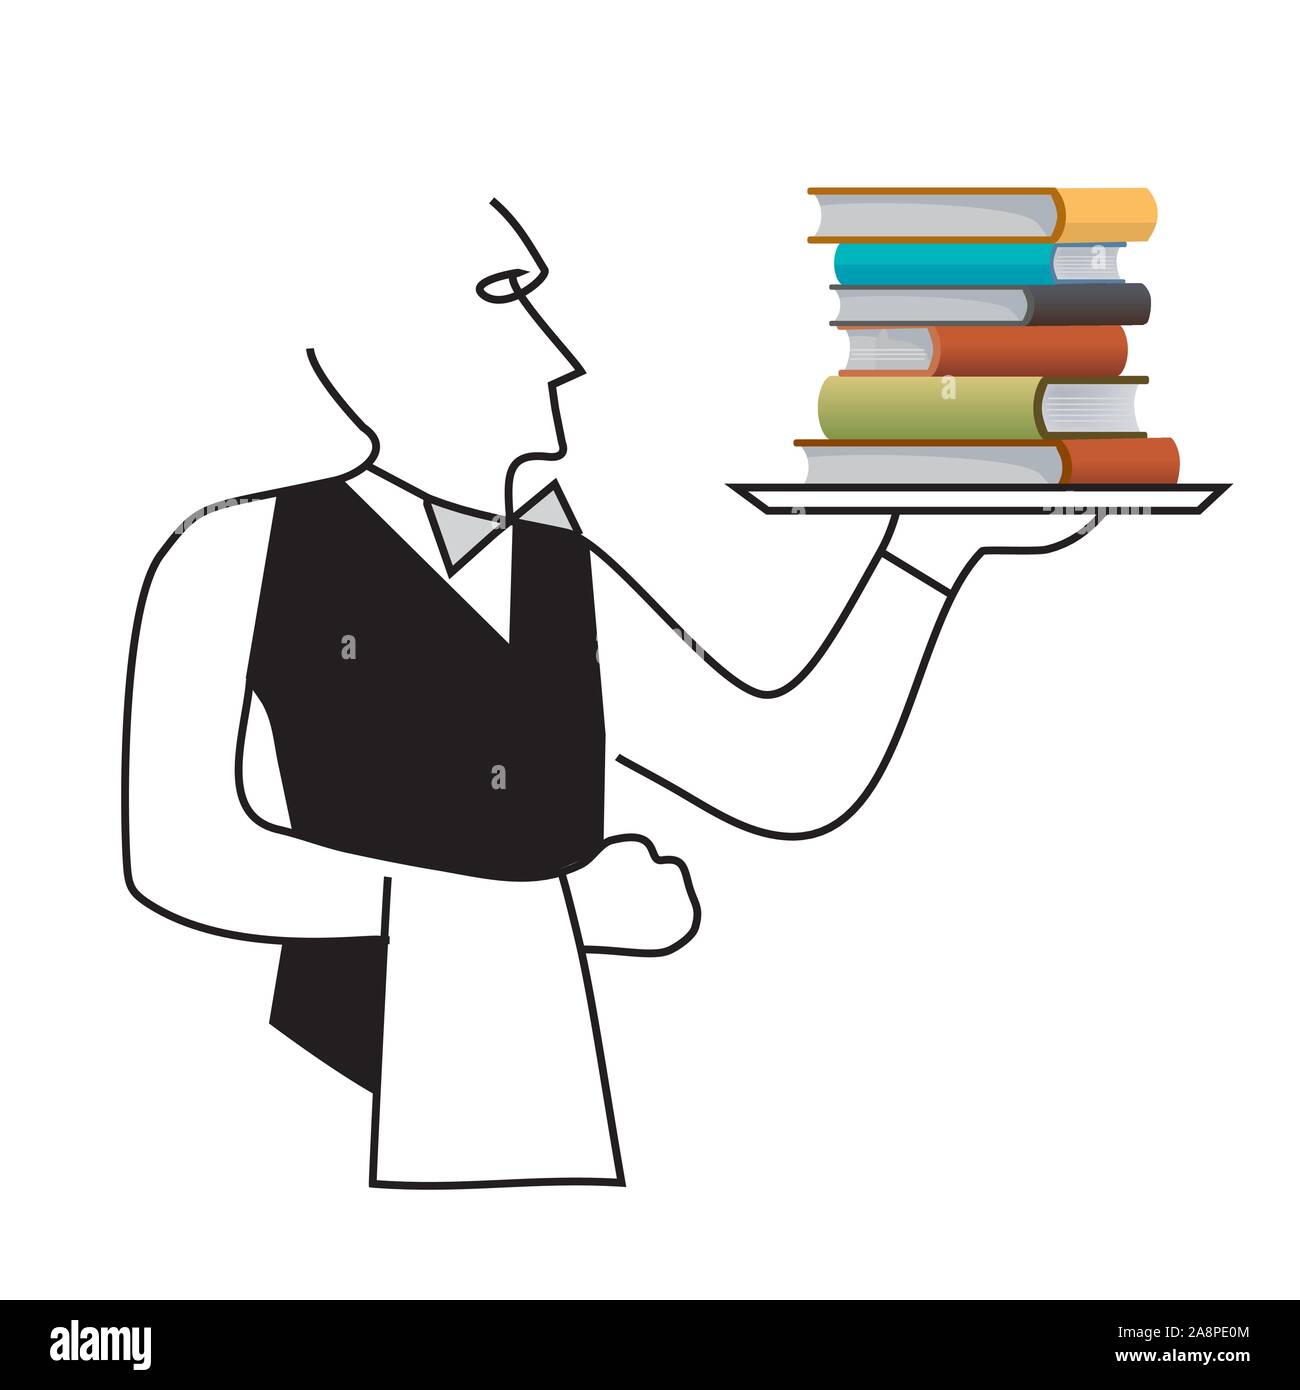 Waiter serving books, sales of books concept. Line art stylized illustration of a waiter or butler serving books on a tray. Vector available. Stock Vector